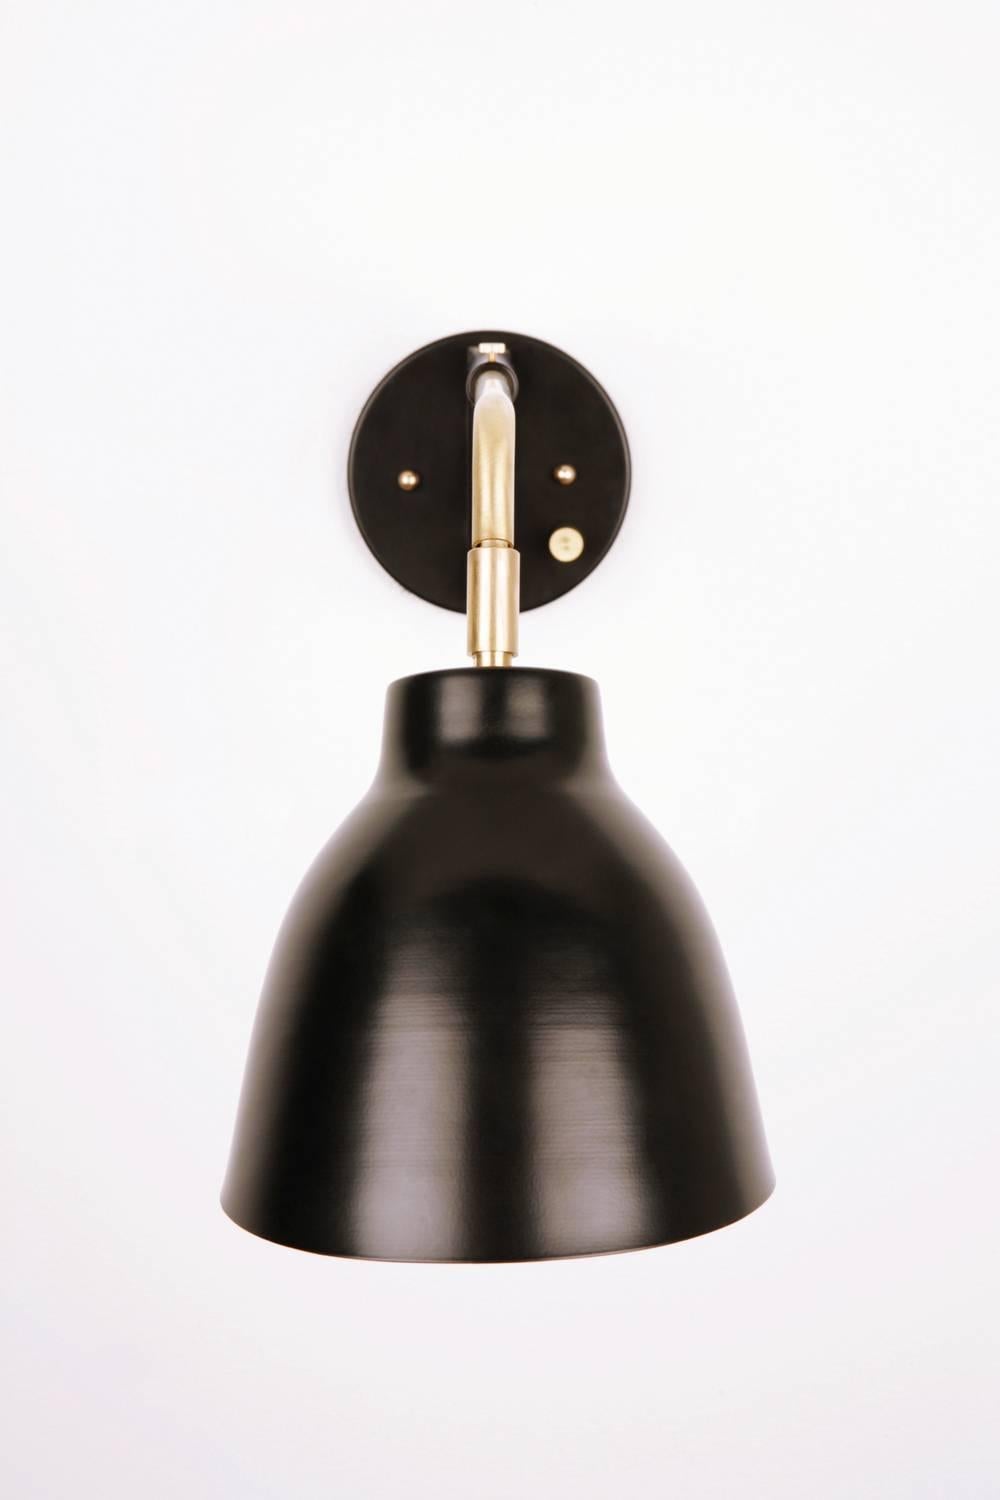 The navire jib sconce is part of Atelier de Troupe's Classic Navire collection inspired by nautical lamps from the 1930s. The fixture has a solid brass arm and up and down tilting shade. Shade options are uncoated brass or powder coated black. The